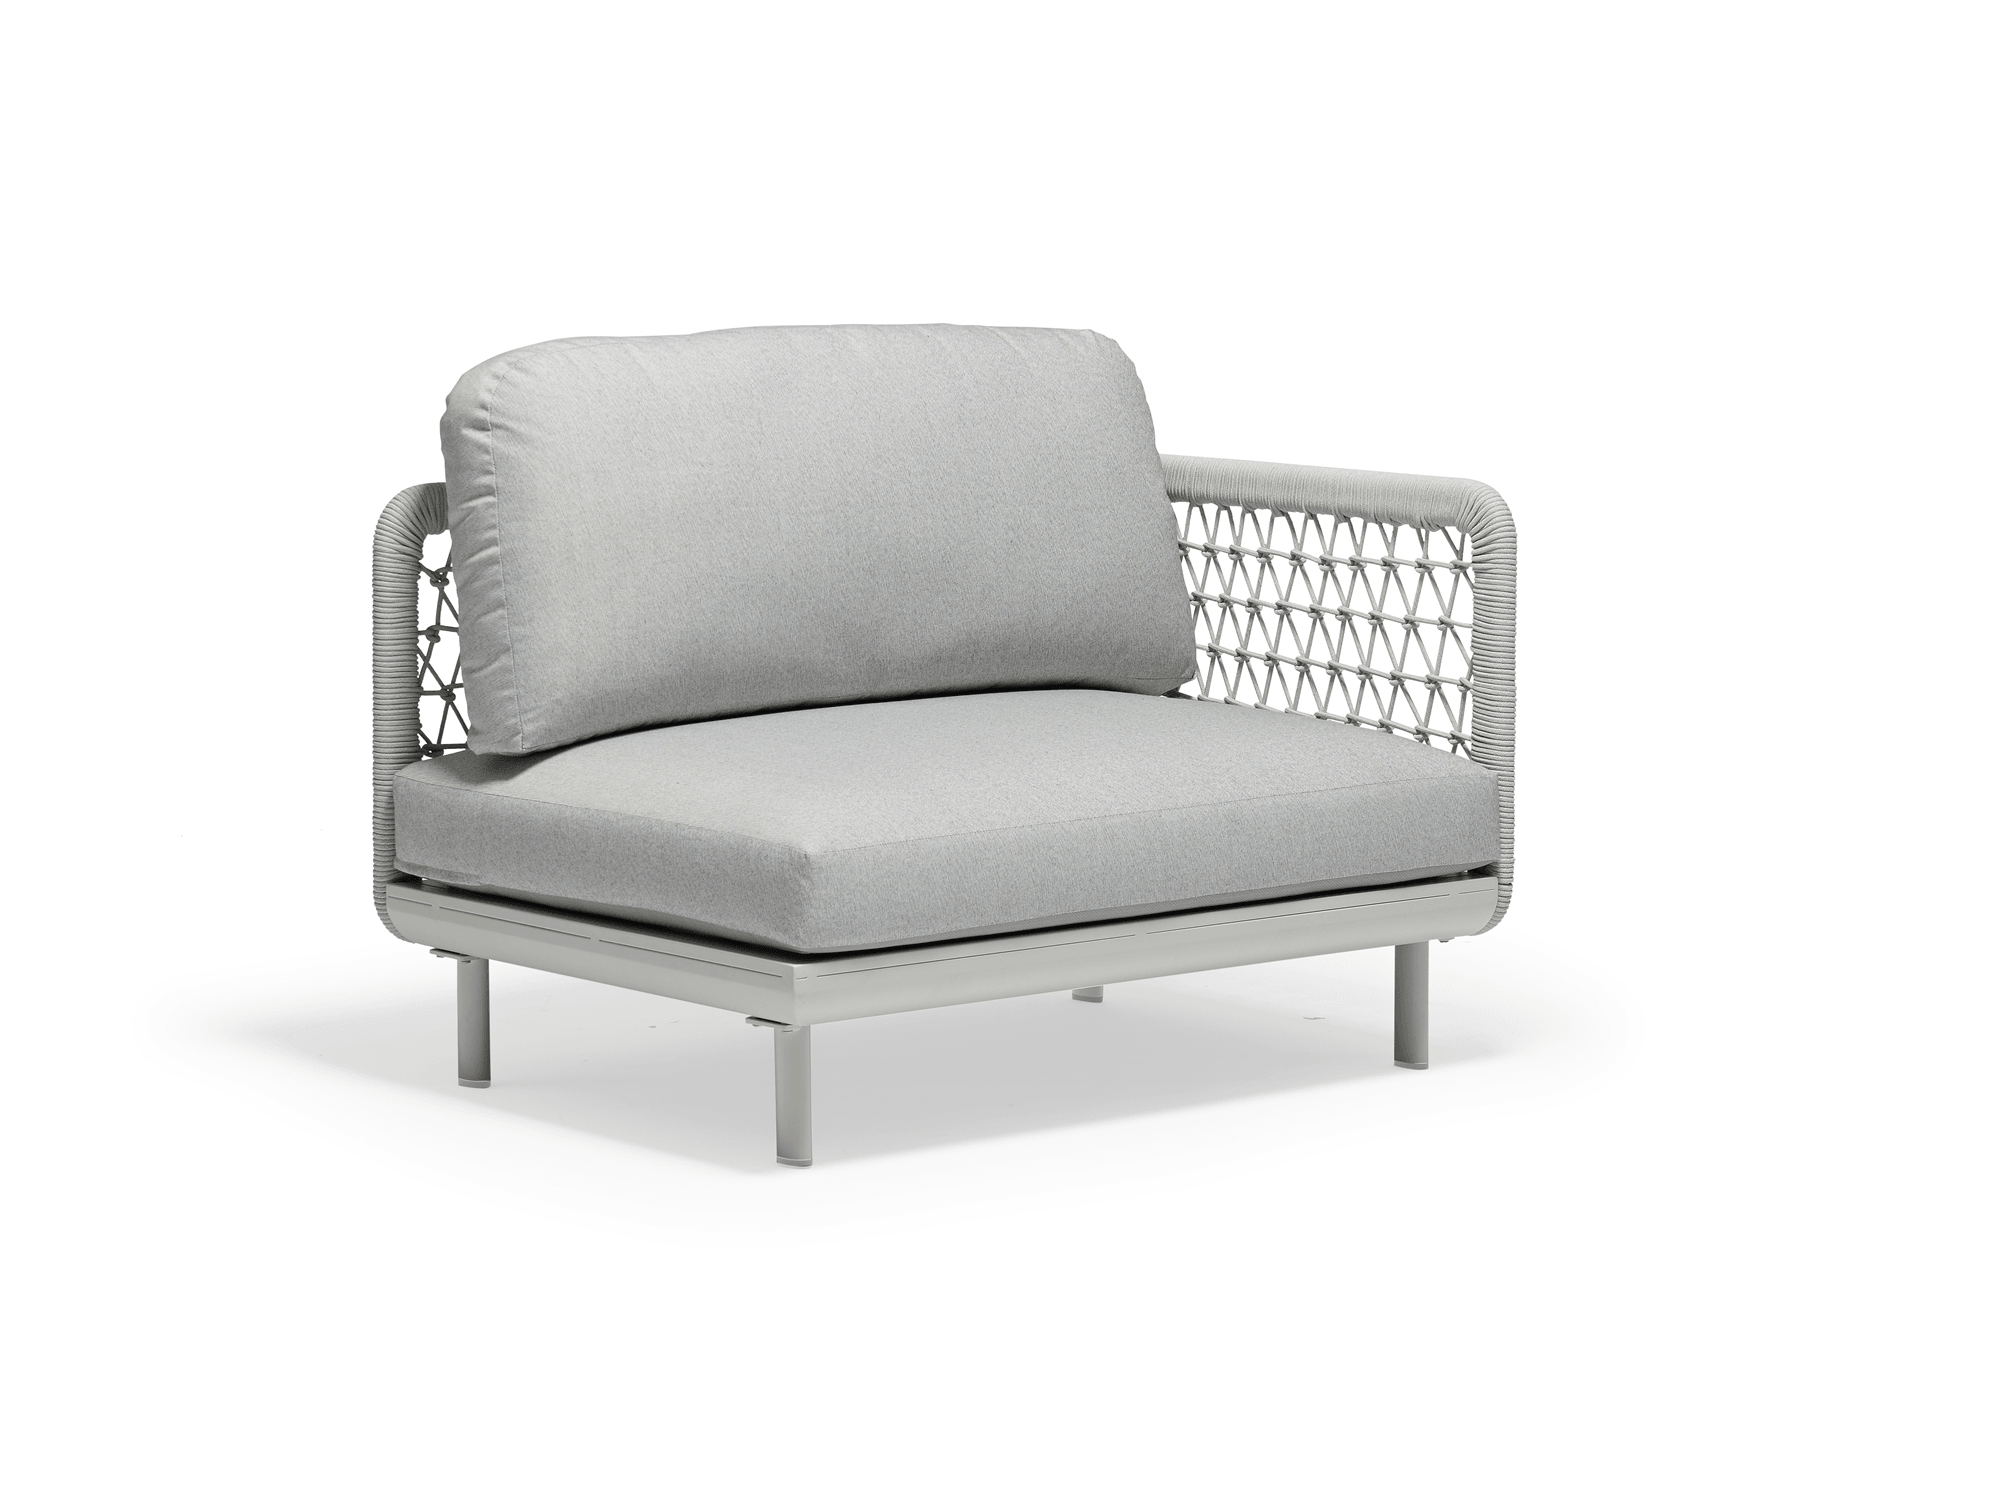 Amberly Chair In Light Grey - Euro Living Furniture